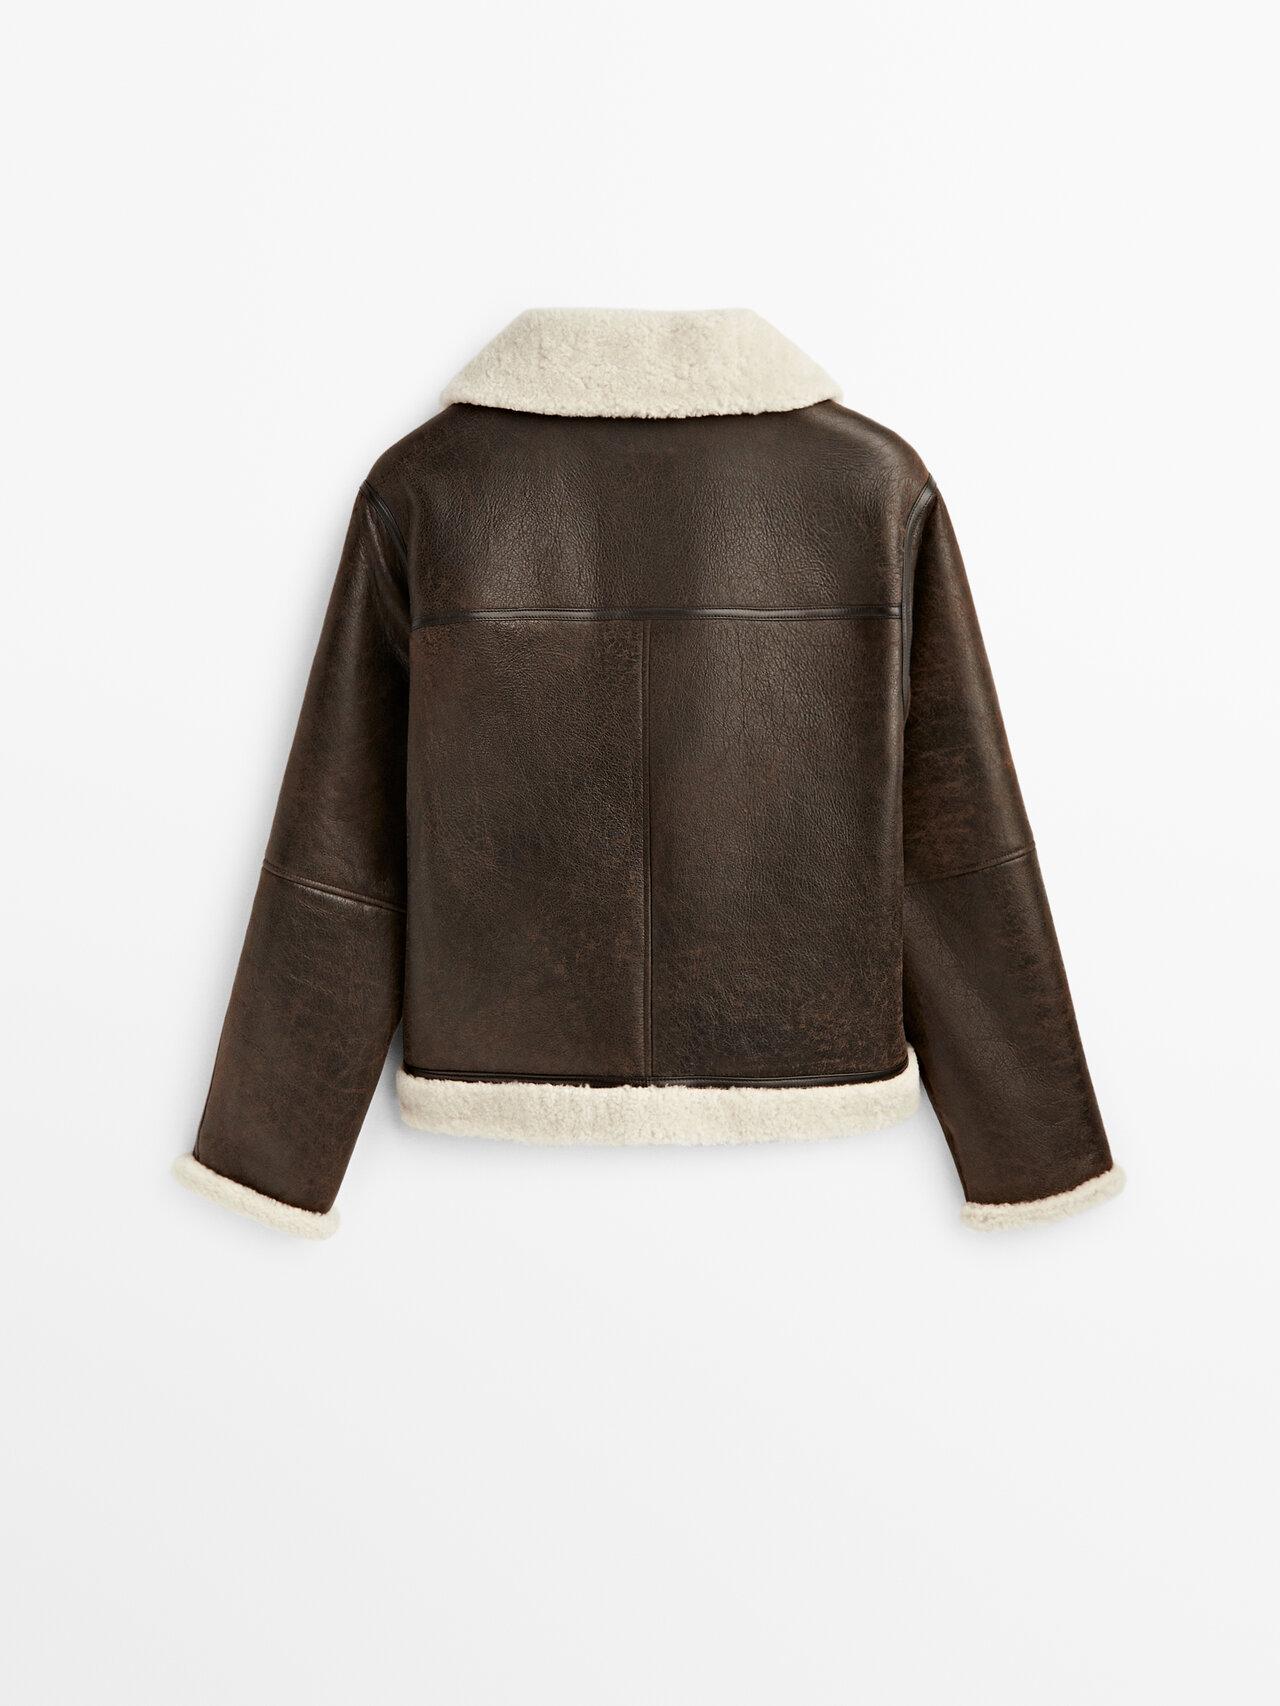 MASSIMO DUTTI Mouton Leather Aviator Jacket in Brown | Lyst